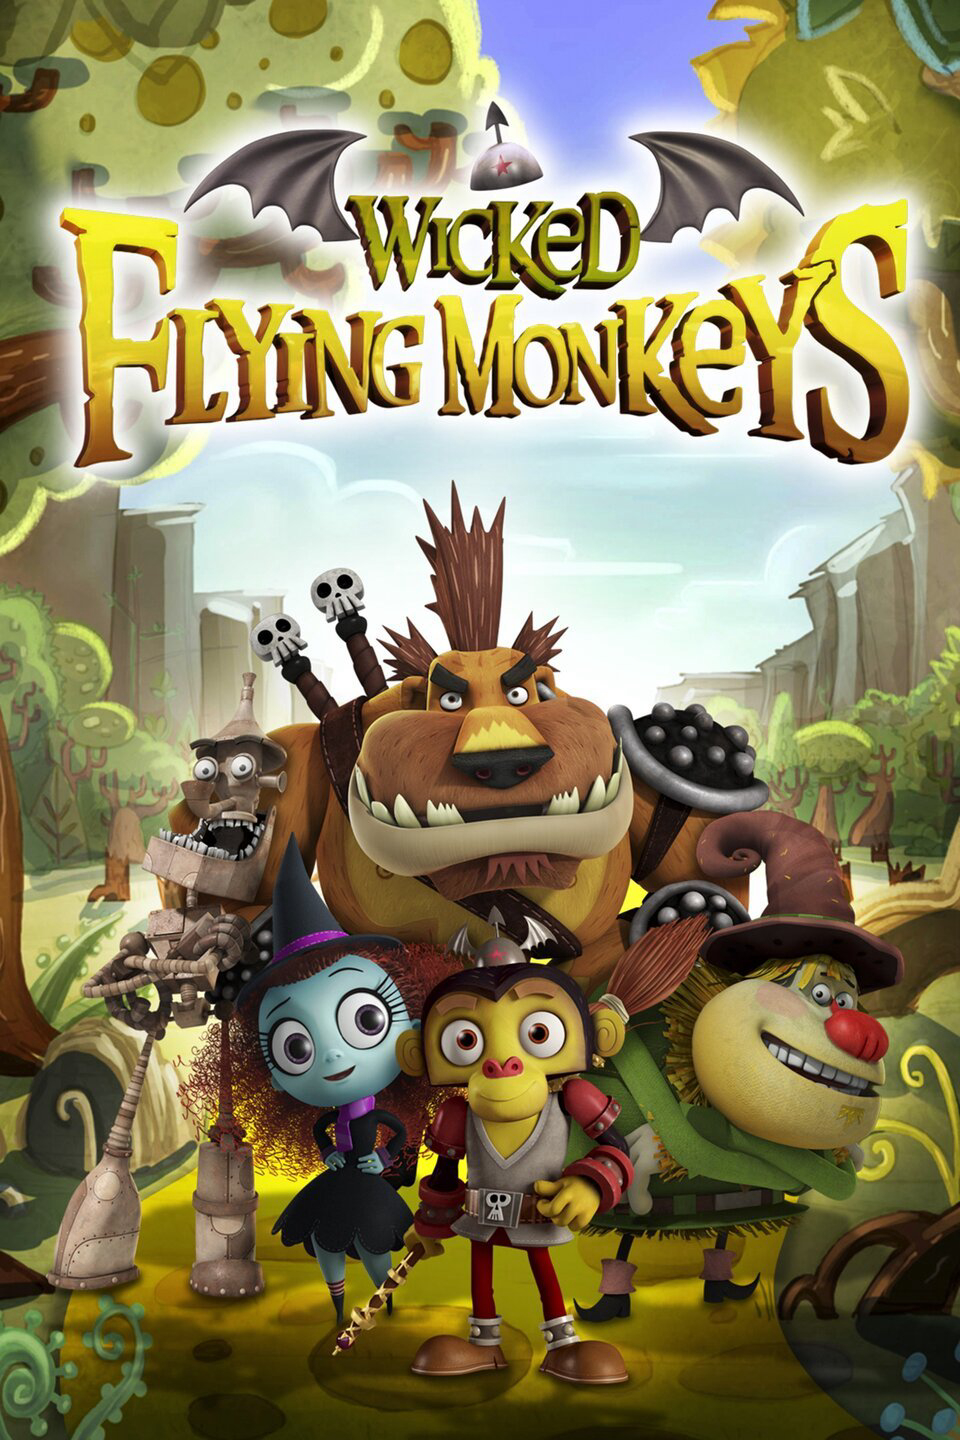 Poster Phim Những con khỉ bay tinh nghịch (Wicked Flying Monkeys)